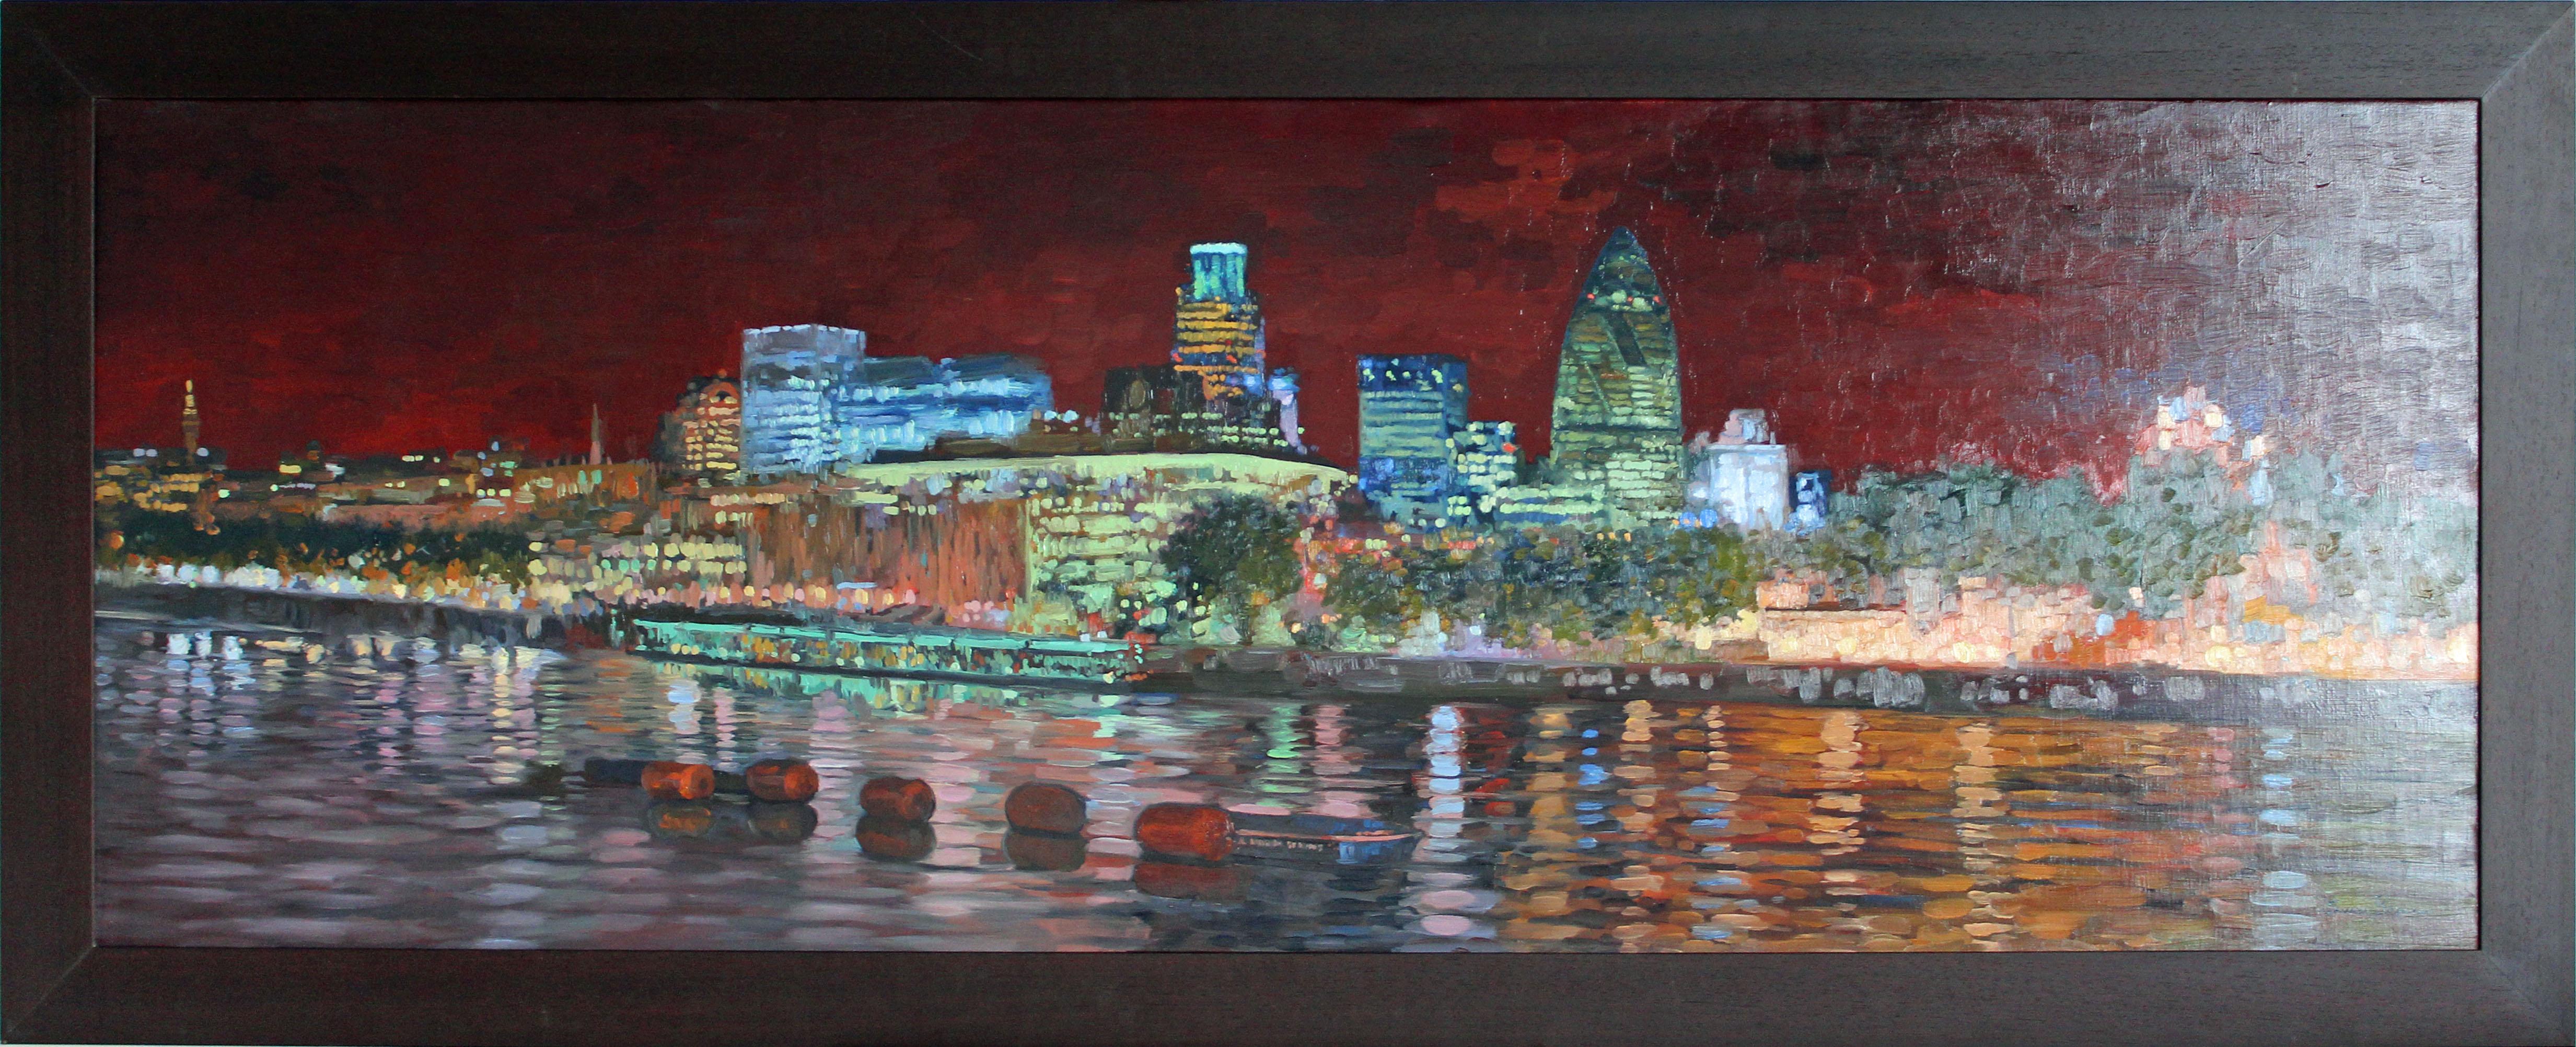 View of the City From the Thames - Painting by Simon Kozhin